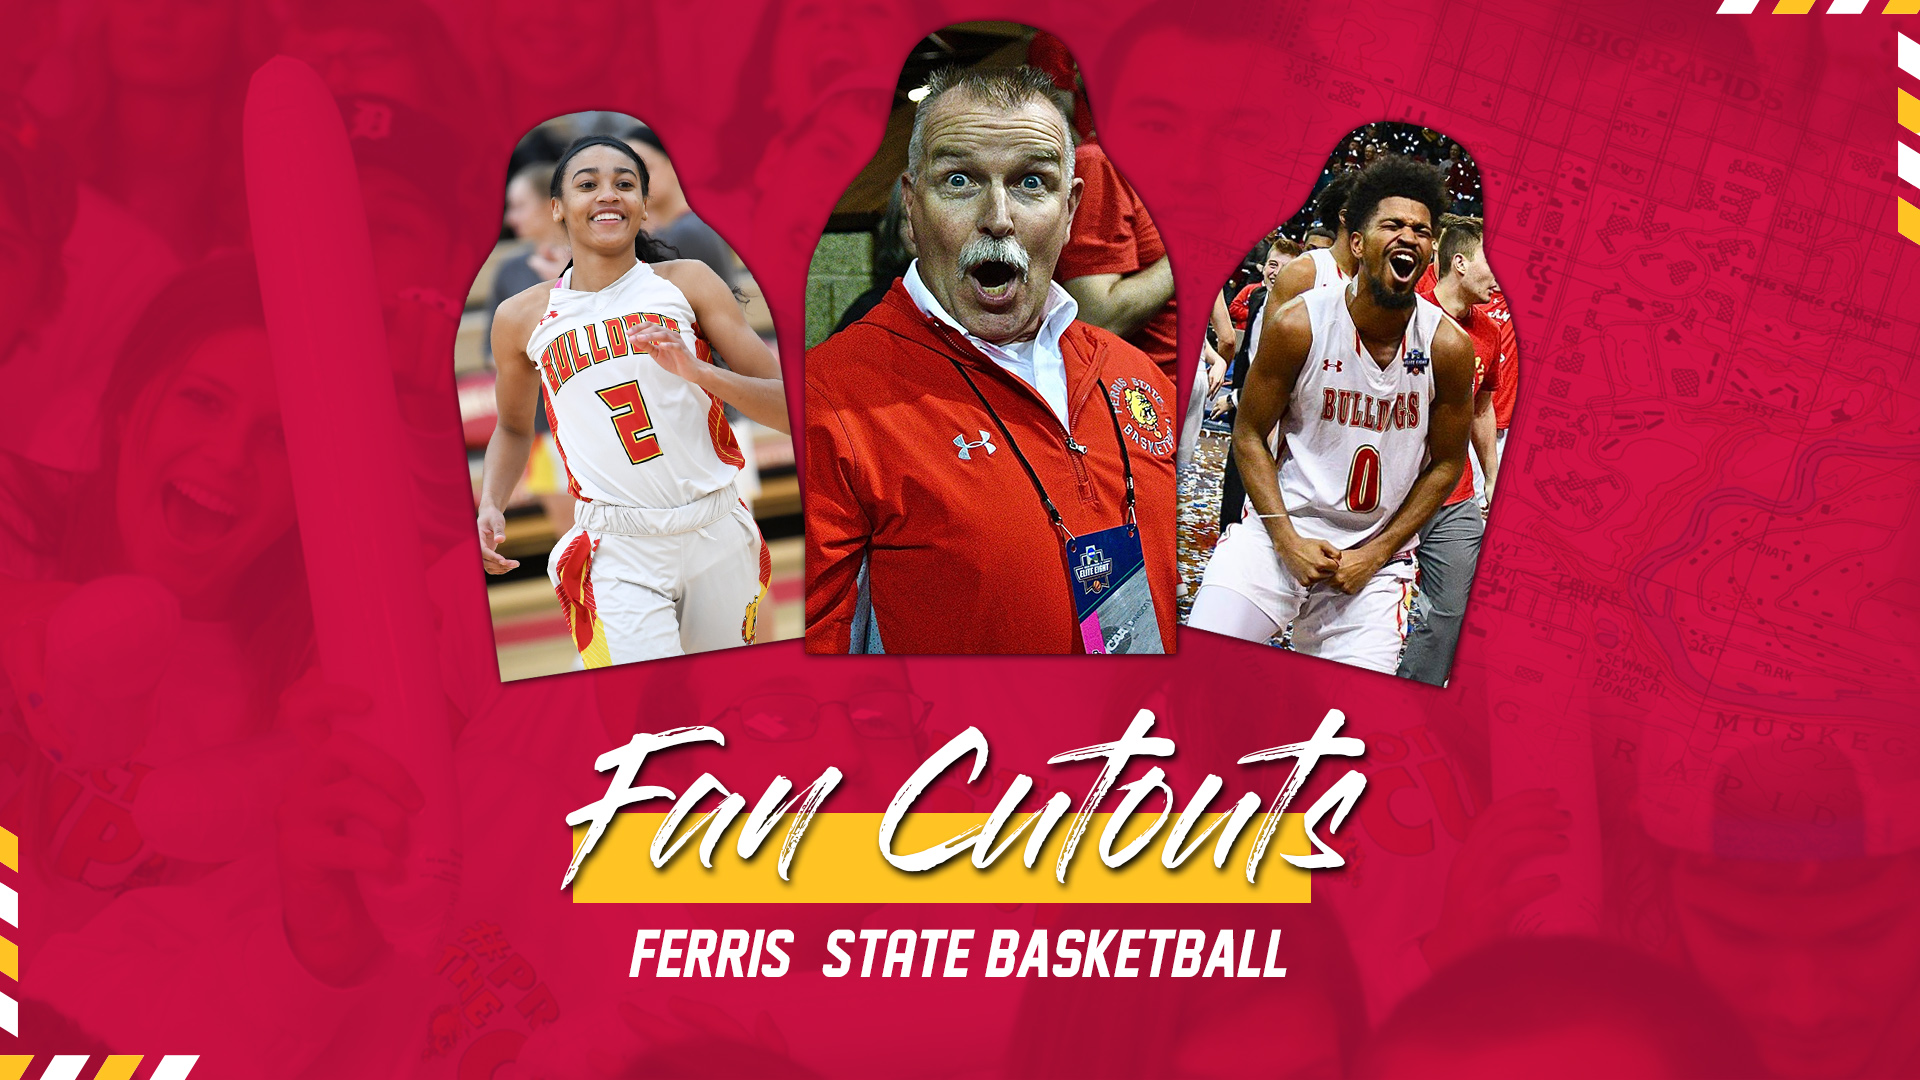 Purchase A Personalized Fan Cutout For Ferris State Basketball This Season!